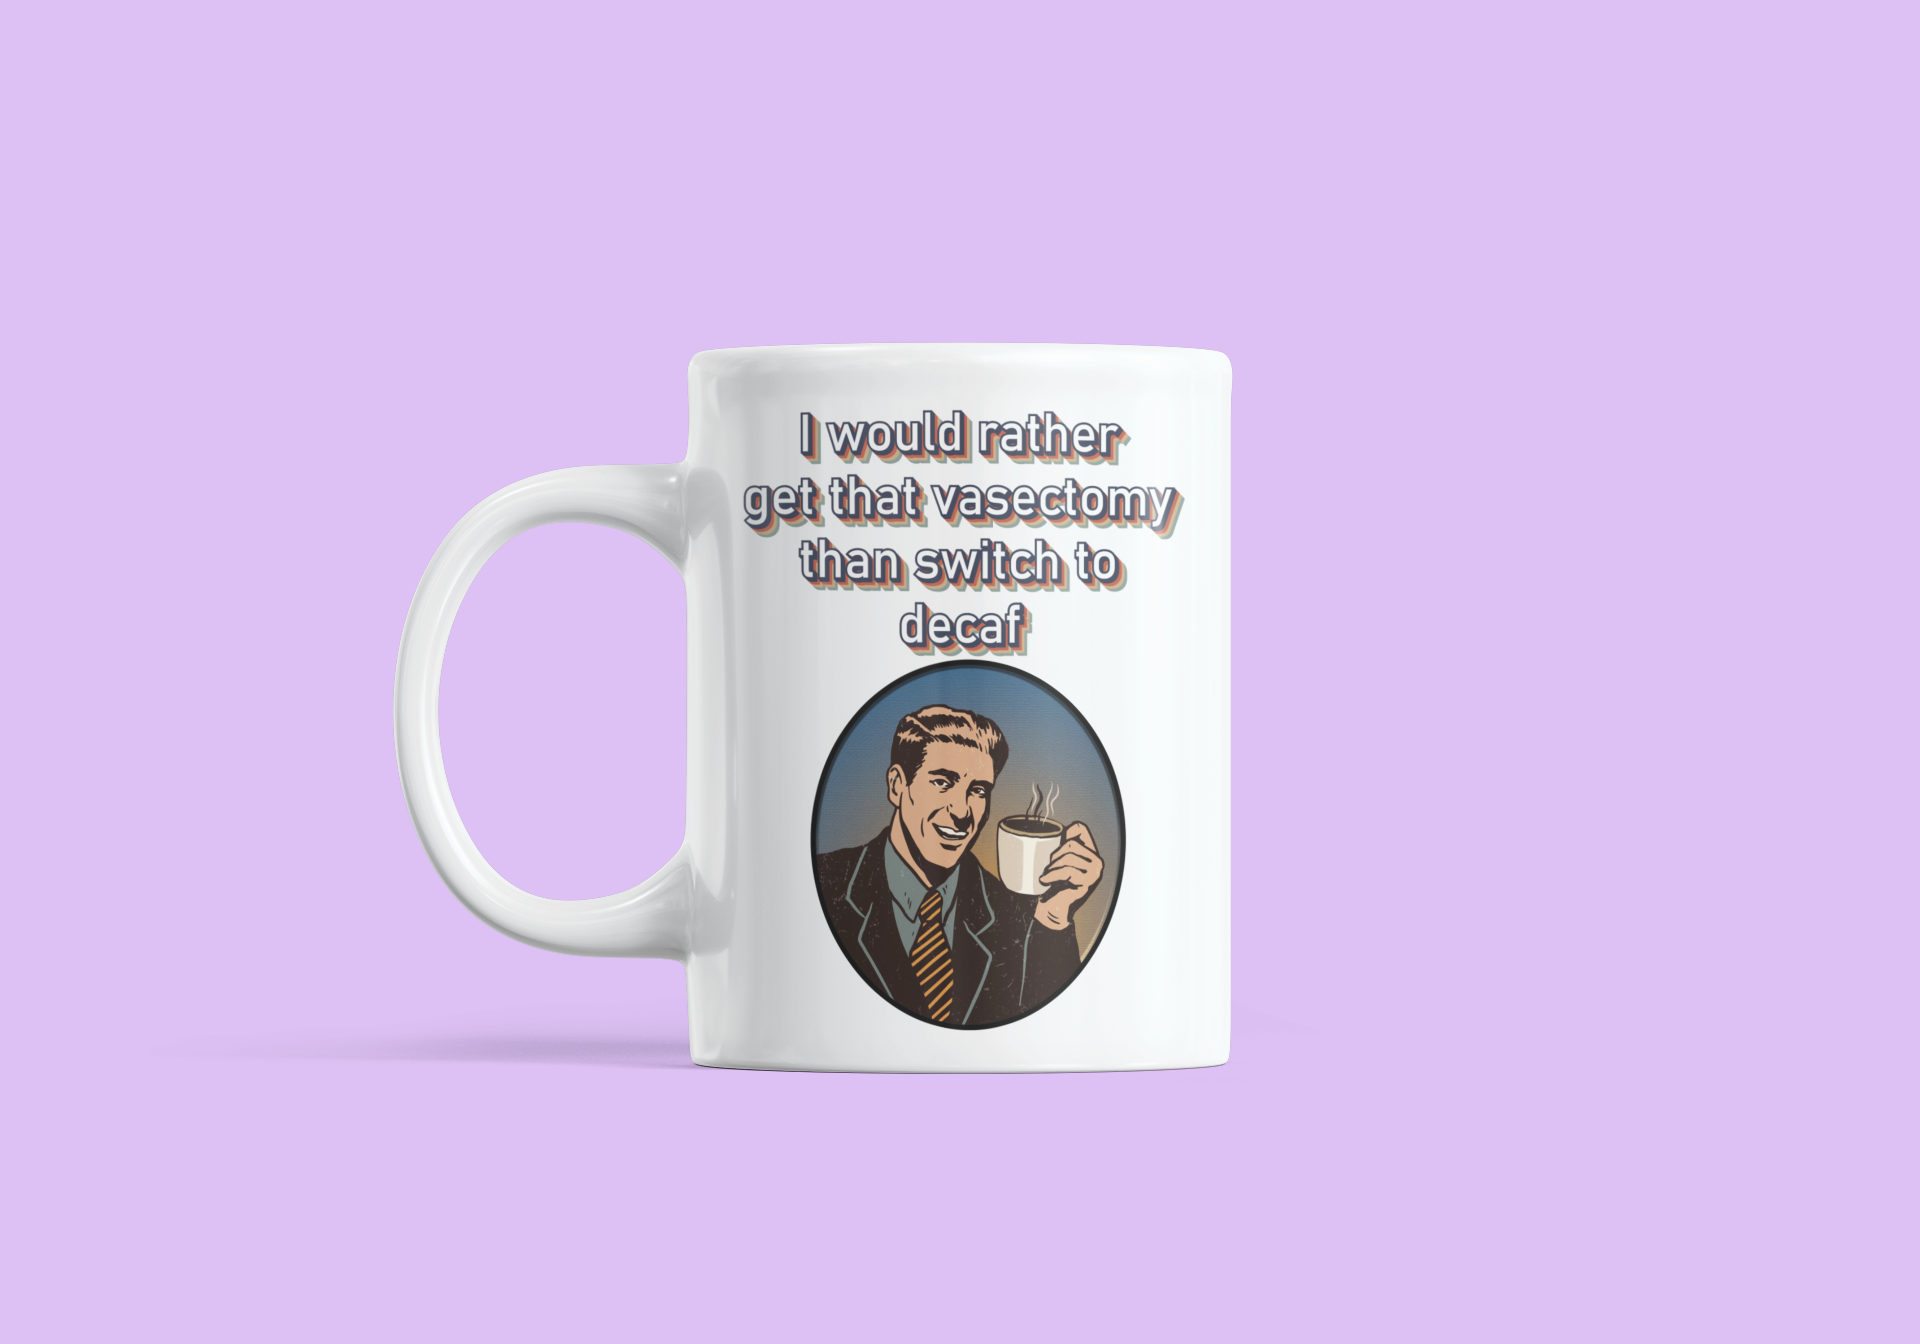 I would rather get a vasectomy than switch to decaf adult mug birthday gift boyfriend gift Christmas gift co-worker gift coffee mug coworker gift custom mug dads day gift dishwasher safe mug fiance gift funny coffee mug funny mug gift for boyfriend gift for dad gift for grandpa gift for her gift for him gift for husband gift for mom gift for sister gift for wife gift idea girlfriend gift Husband Gift moms gift mothers day gift mug school gift sports teacher gift Unique gift wife gift